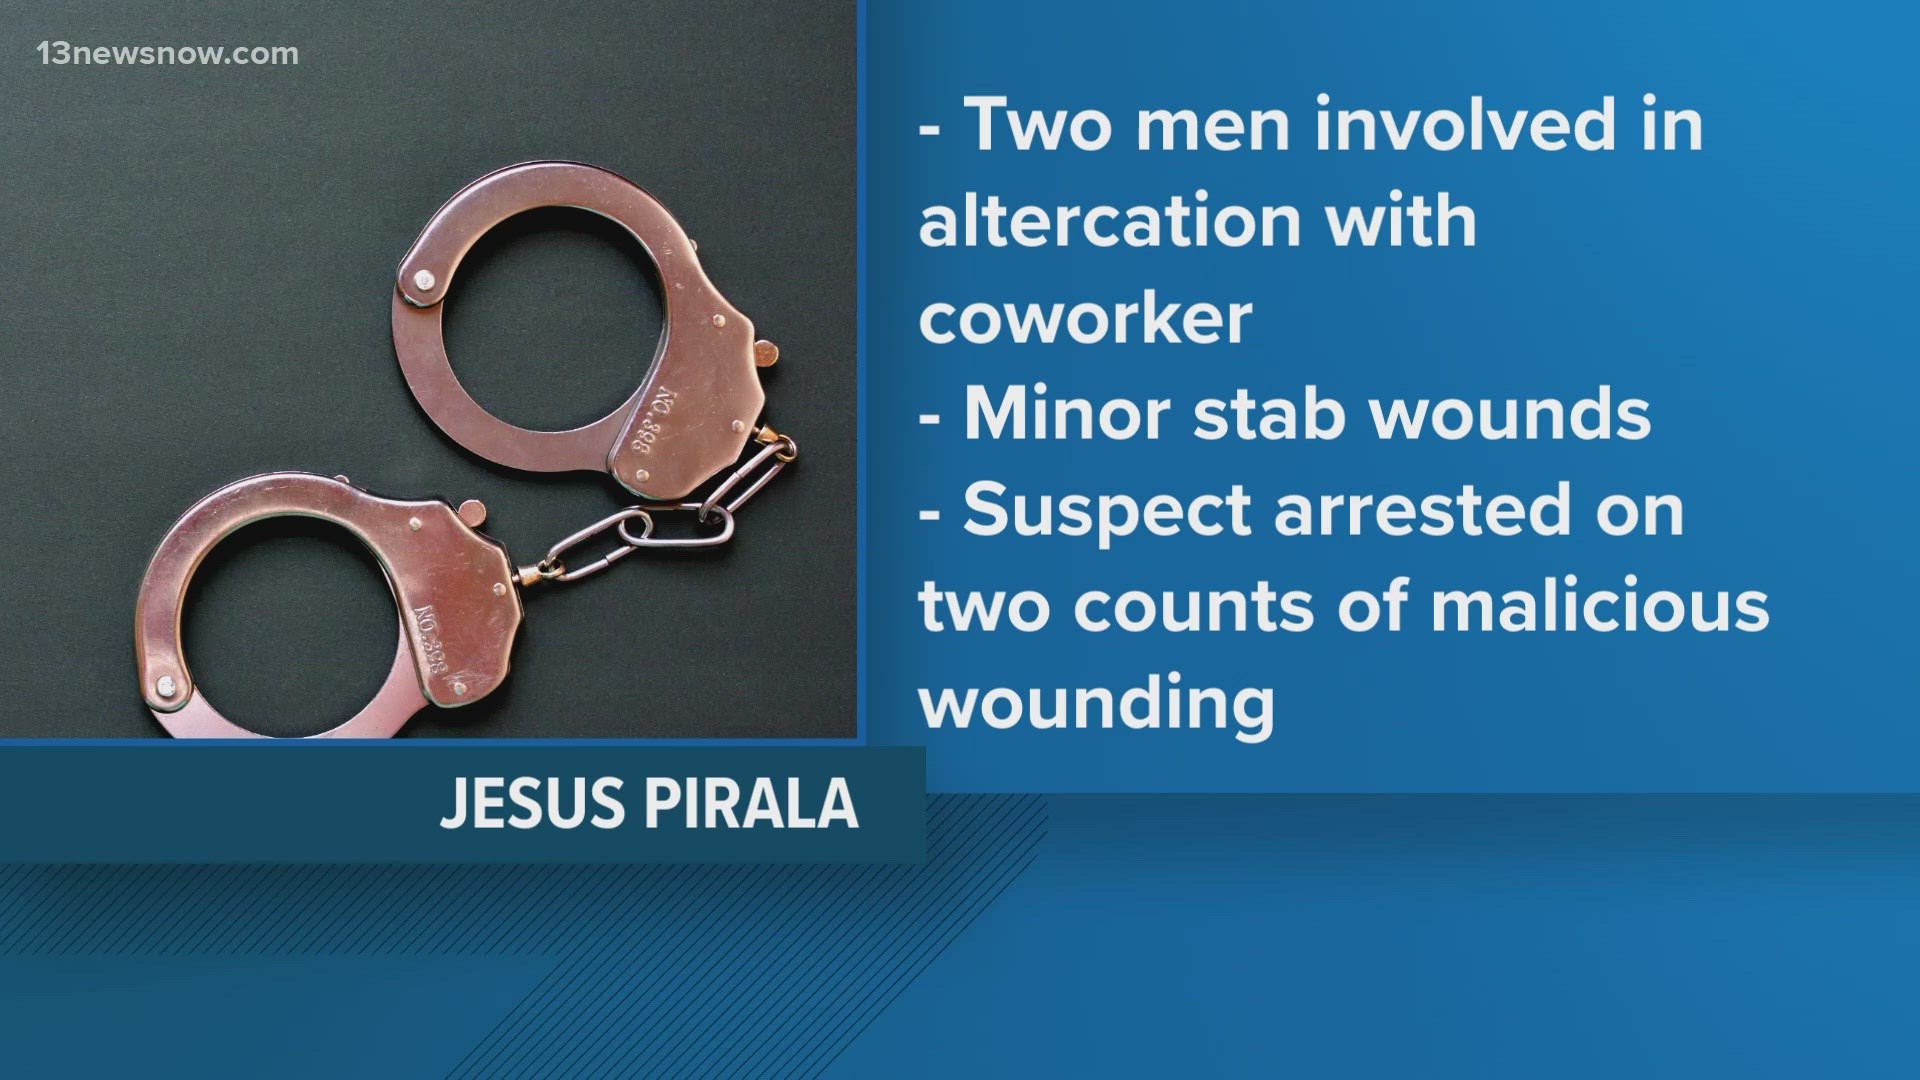 Two men were involved in an altercation with a coworker early Thursday morning. Jesus Pirala has been charged with malicious wounding.